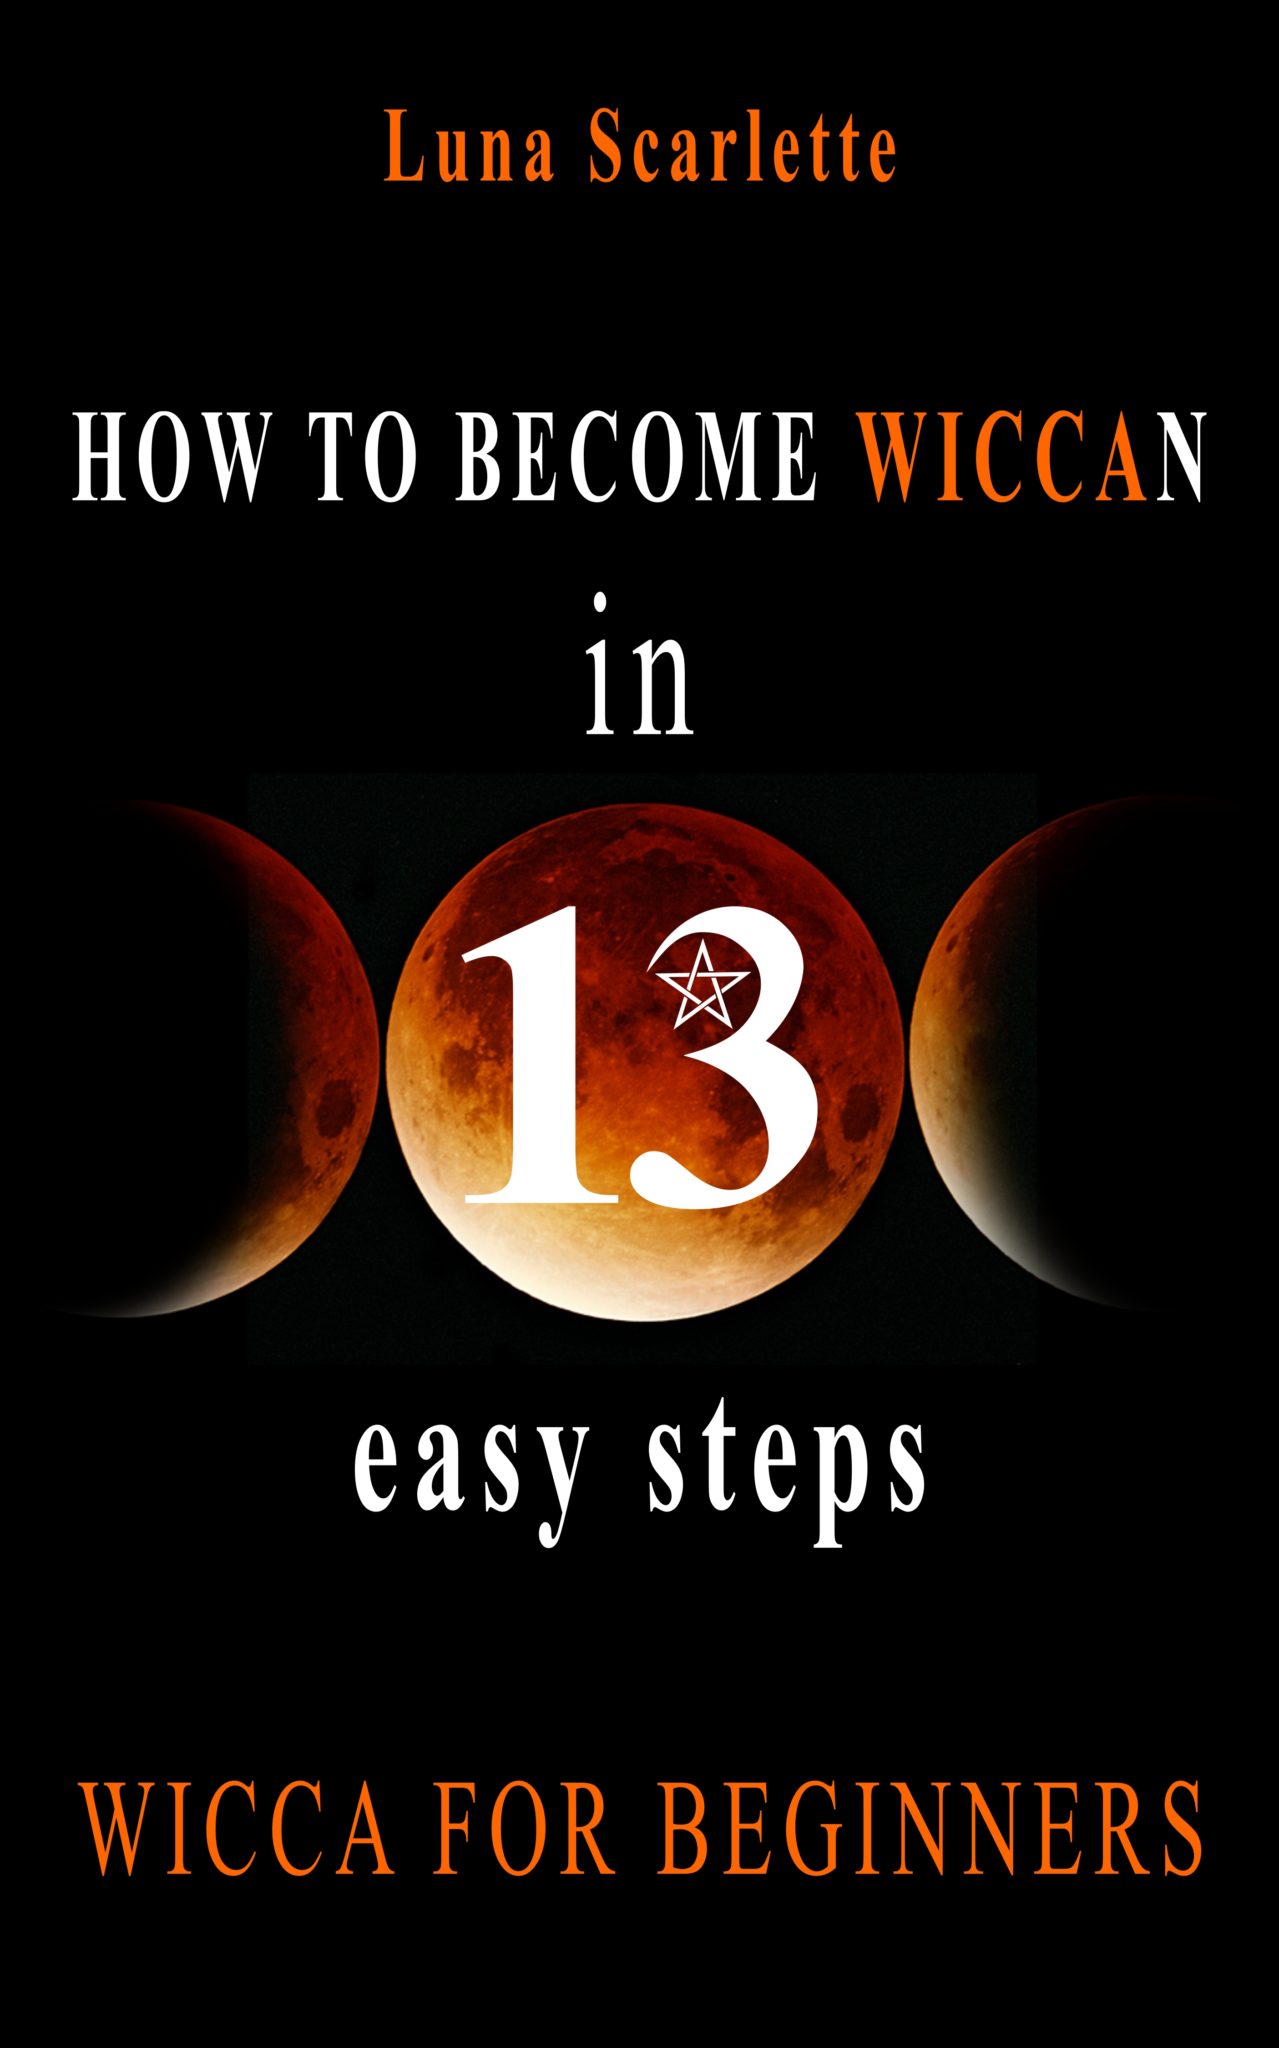 FREE: How To Become Wiccan in 13 Easy Steps: WICCA FOR BEGINNERS by Luna Scarlette